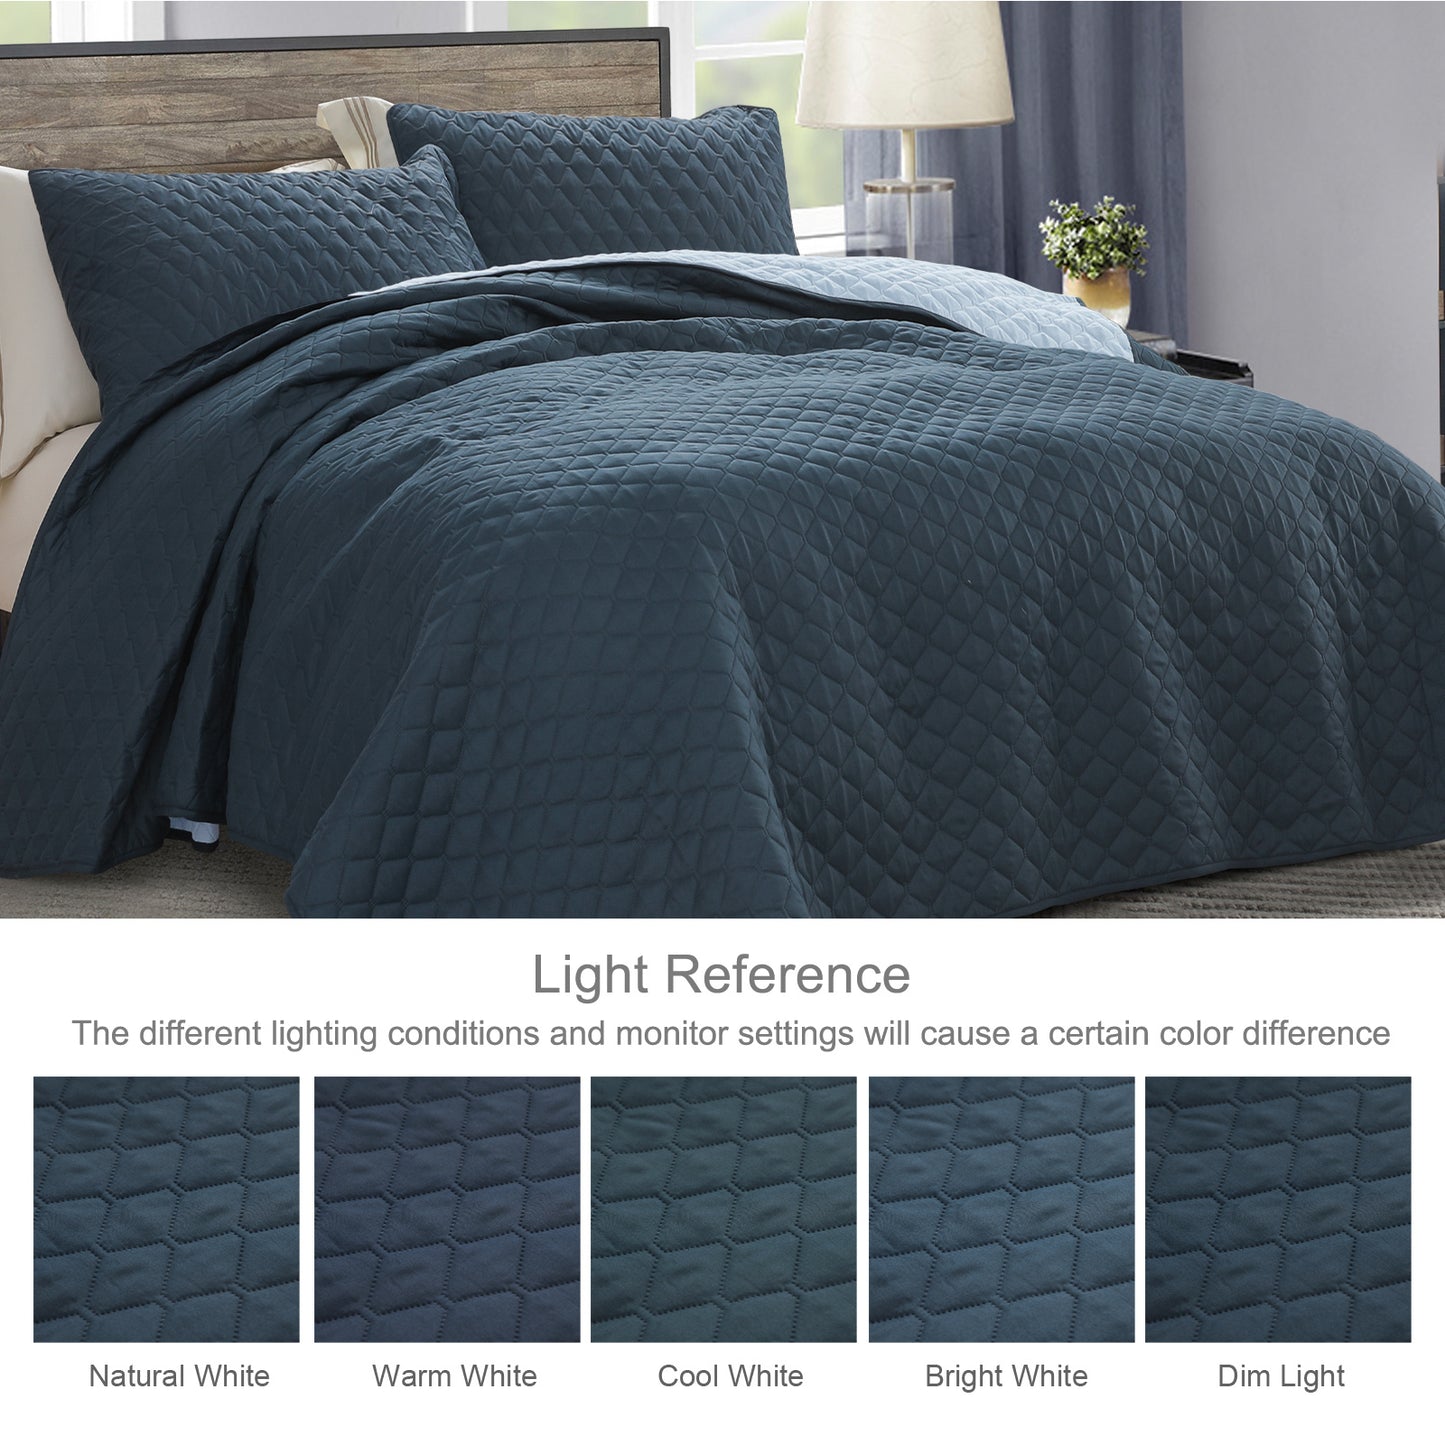 Exclusivo Mezcla Ultrasonic Reversible King Size Quilt Bedding Set with Pillow Shams, Lightweight Quilts King Size, Soft Bedspreads Bed Coverlets for All Seasons - (Navy Blue, 104"x96")